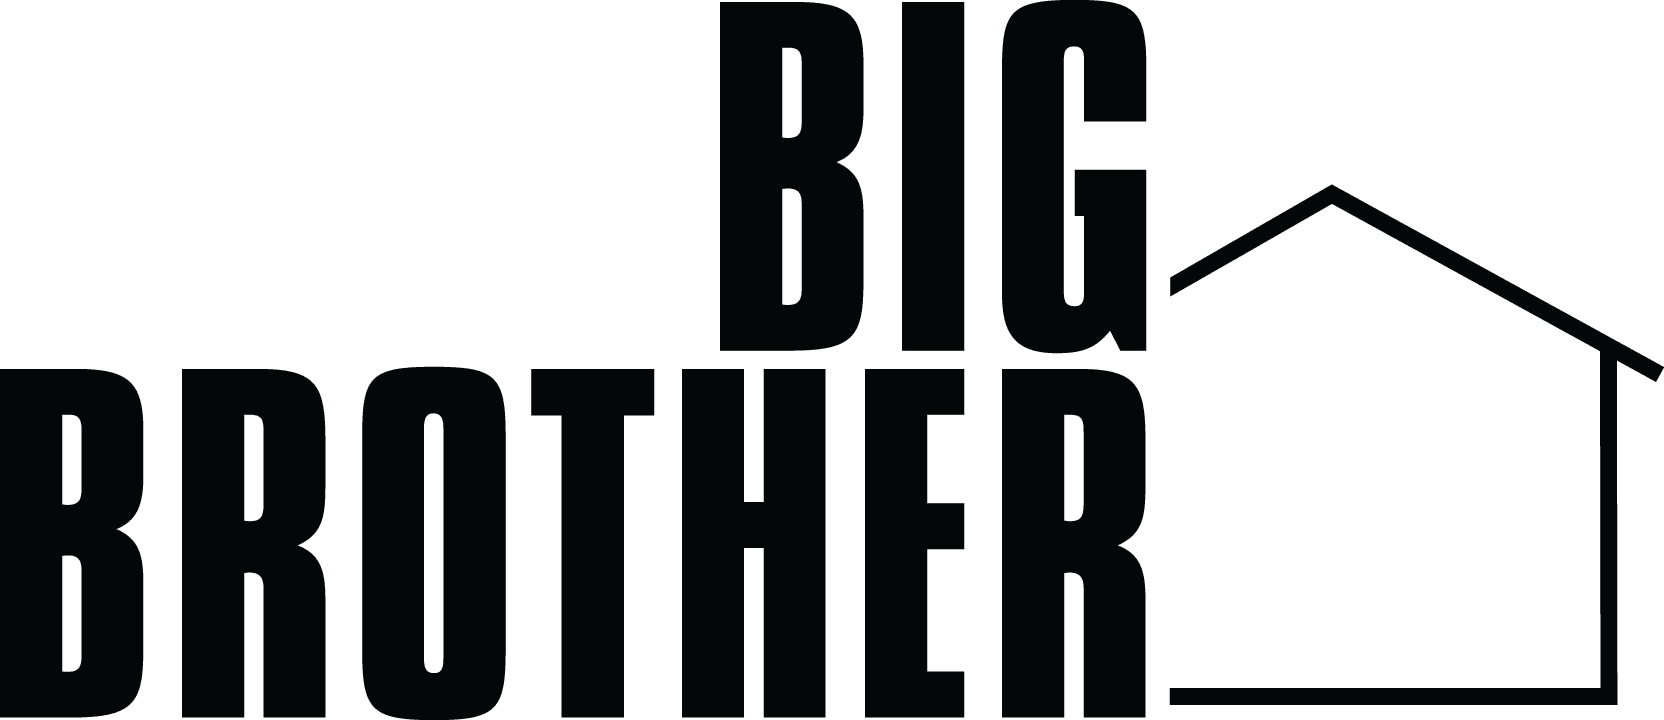 Dr. Michele Noonan Ross starred on the hit CBS reality tv show Big Brother